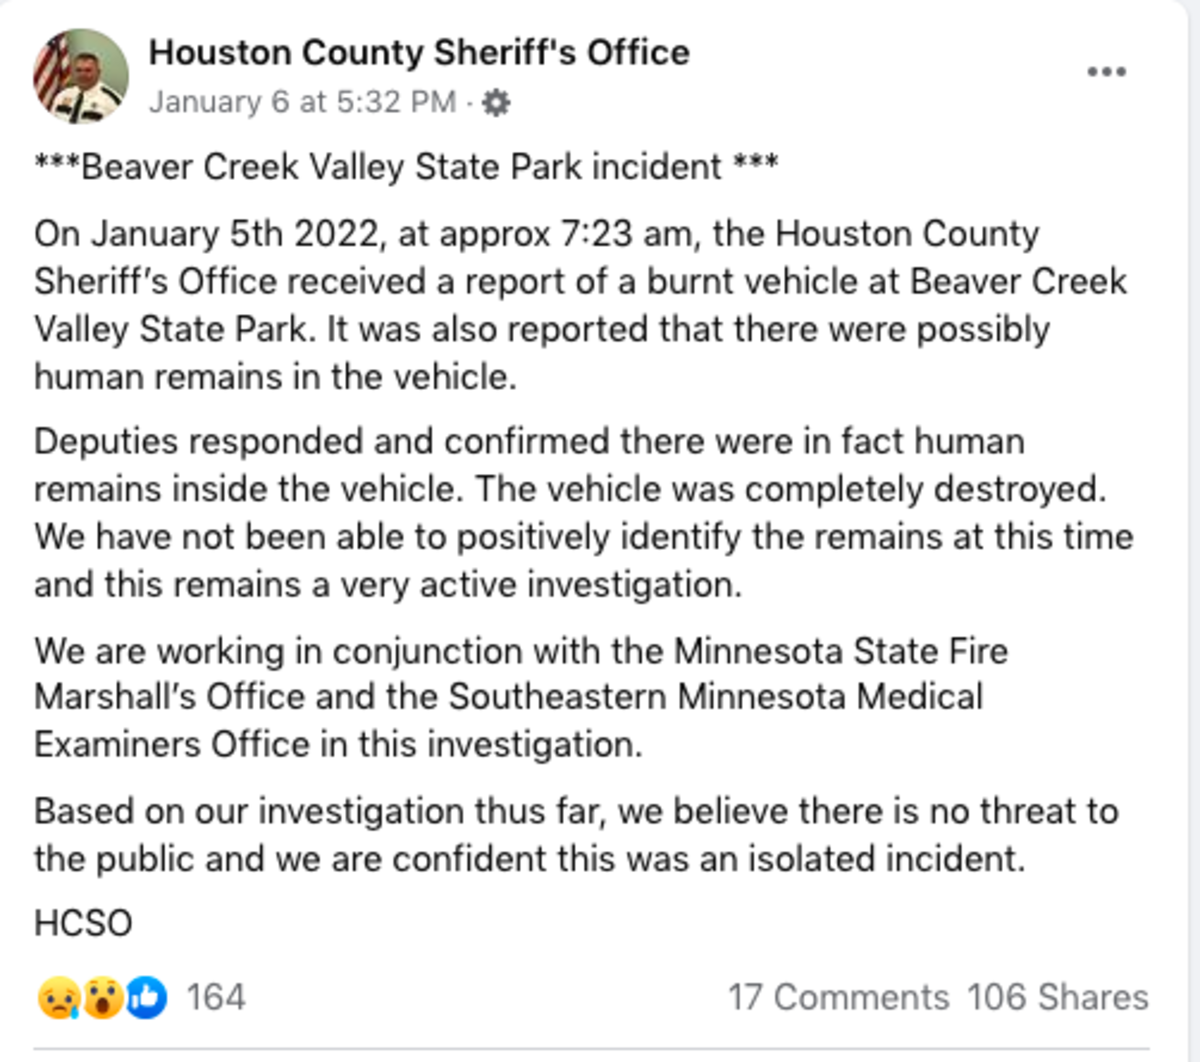 Houston County Sheriff's Office news release